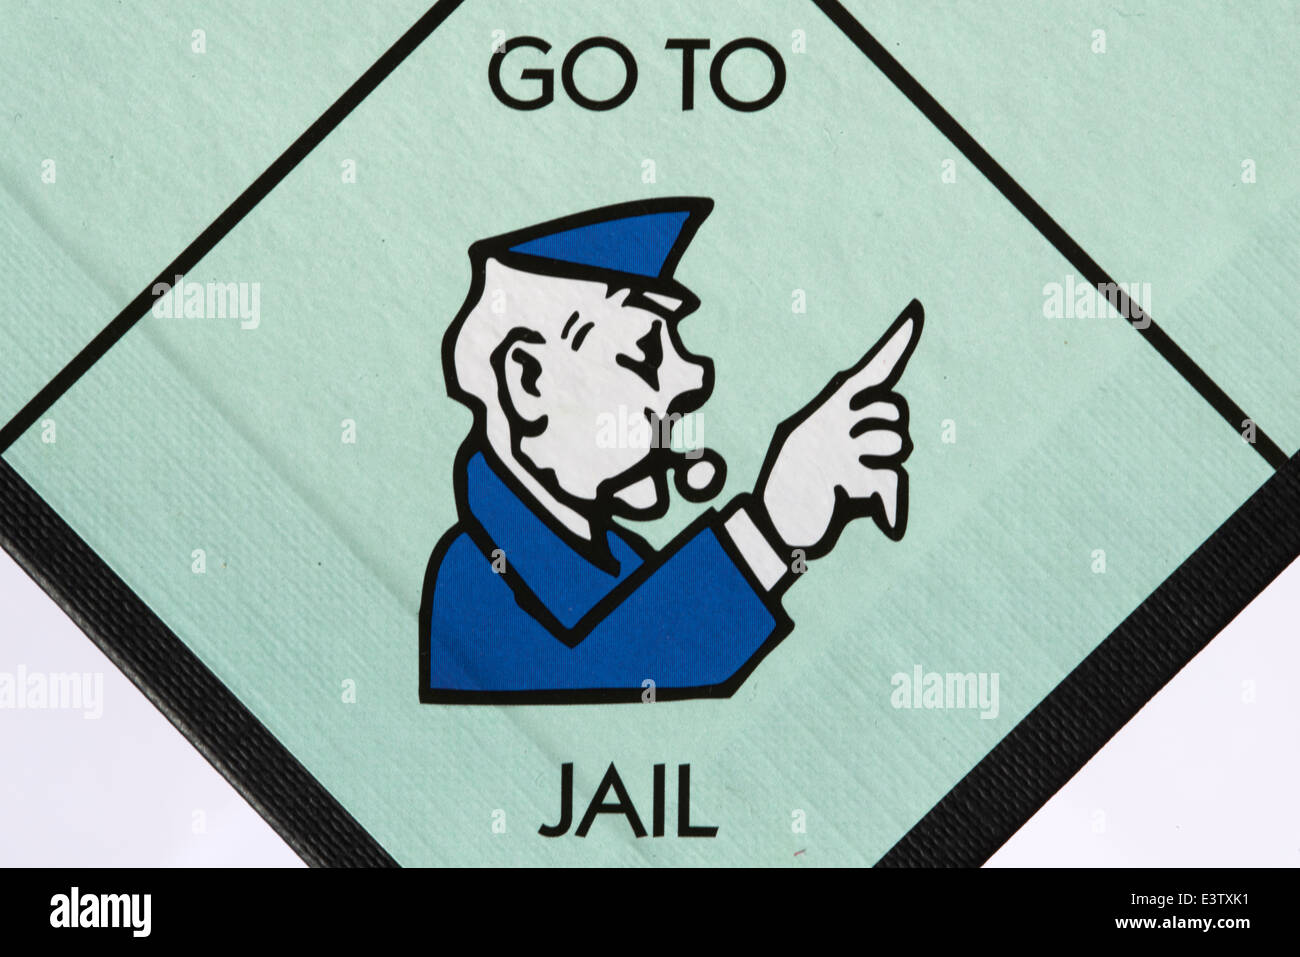 Go to jail space on a Monopoly Game Board Stock Photo